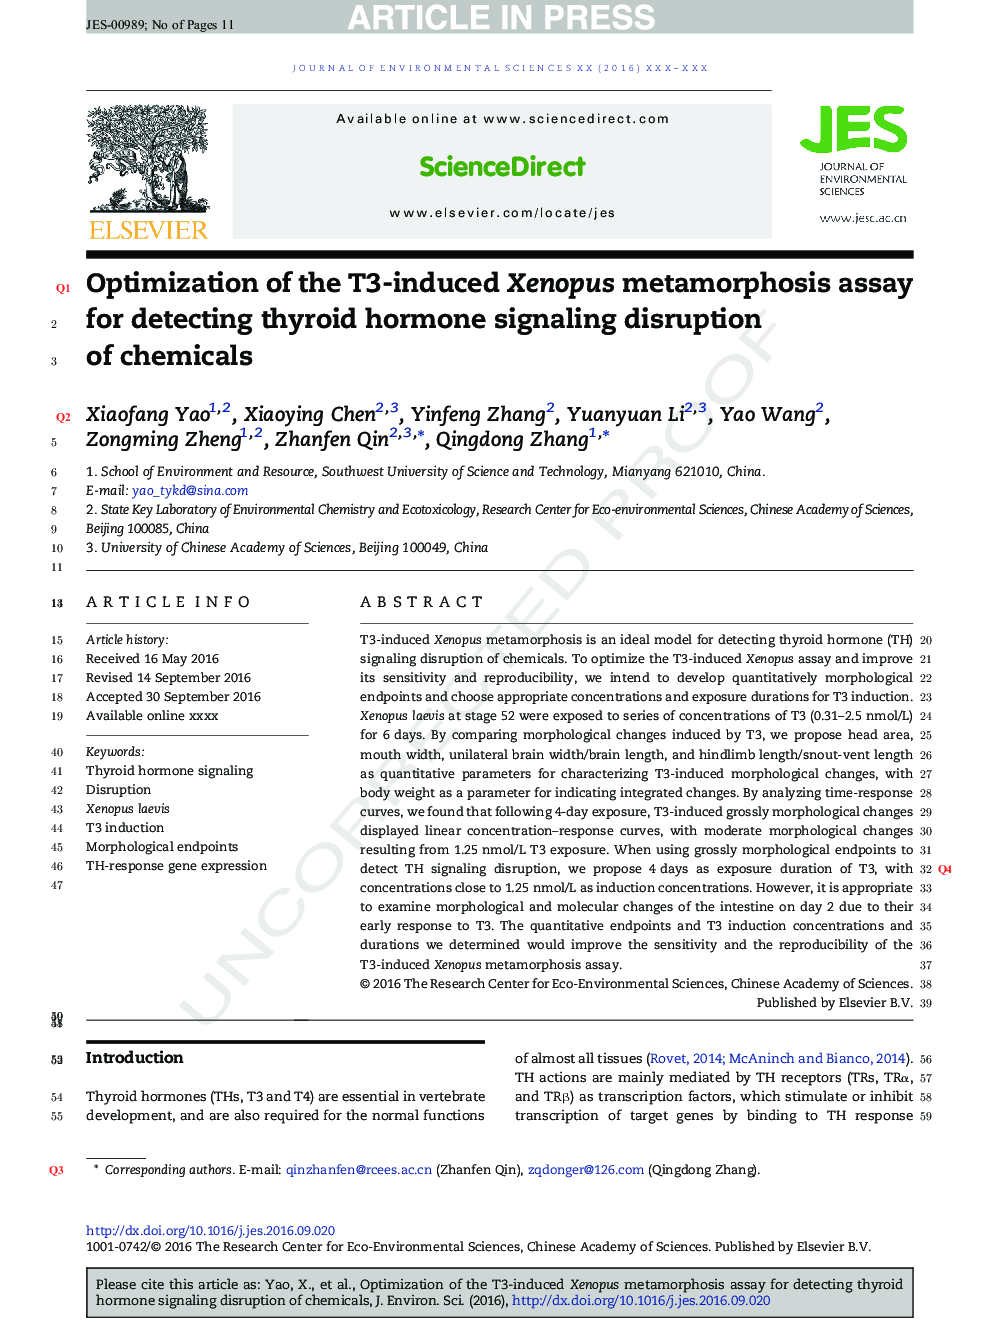 Optimization of the T3-induced Xenopus metamorphosis assay for detecting thyroid hormone signaling disruption of chemicals